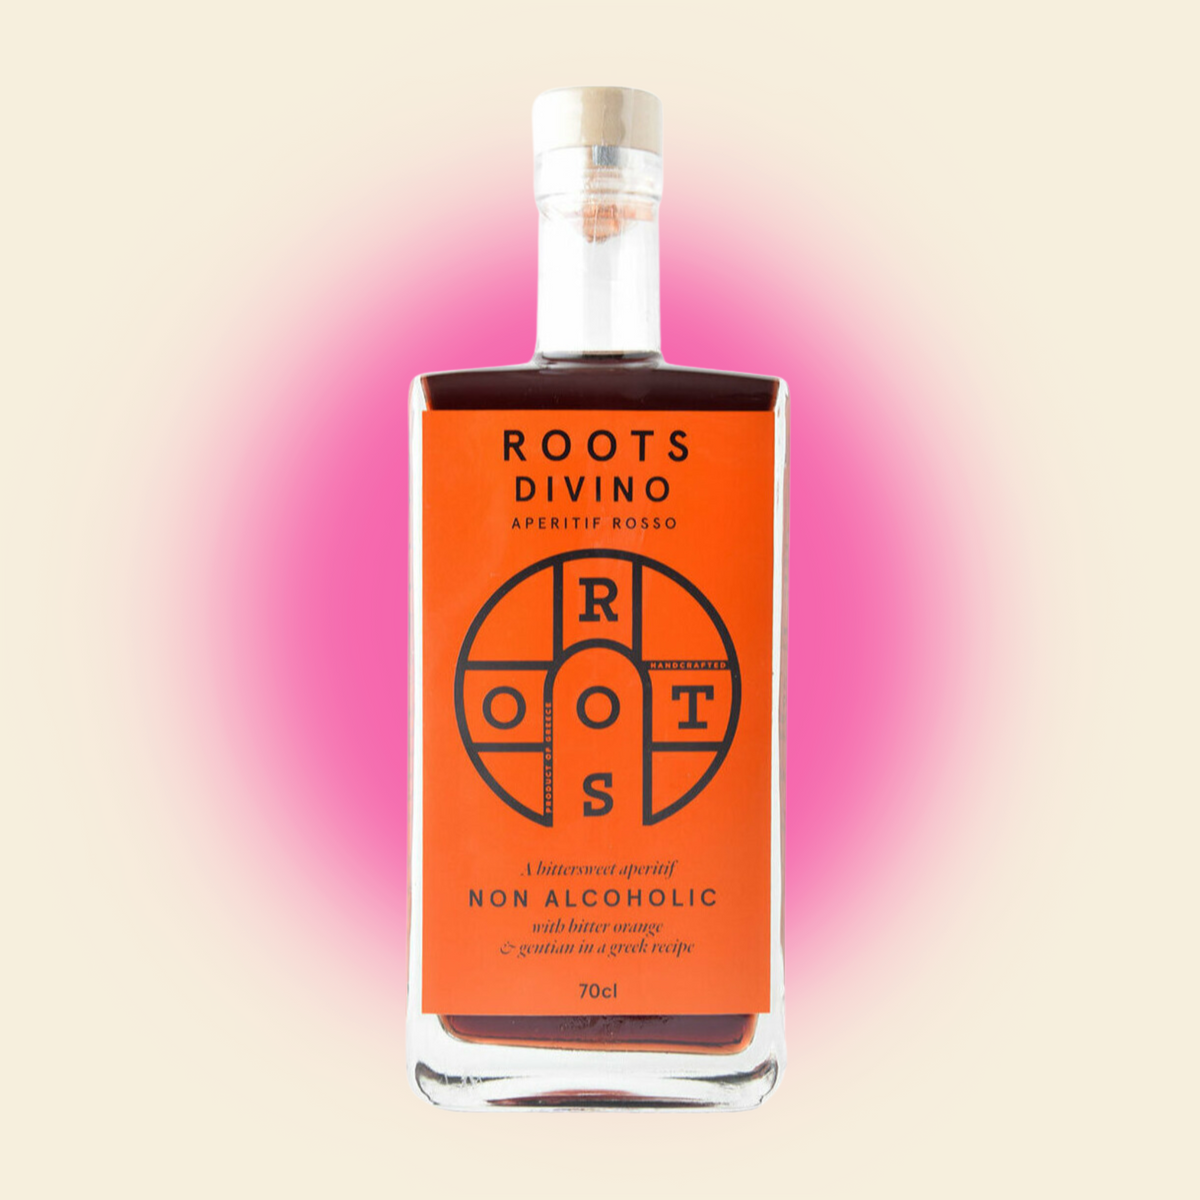 Roots Divino - Rosso Vermouth